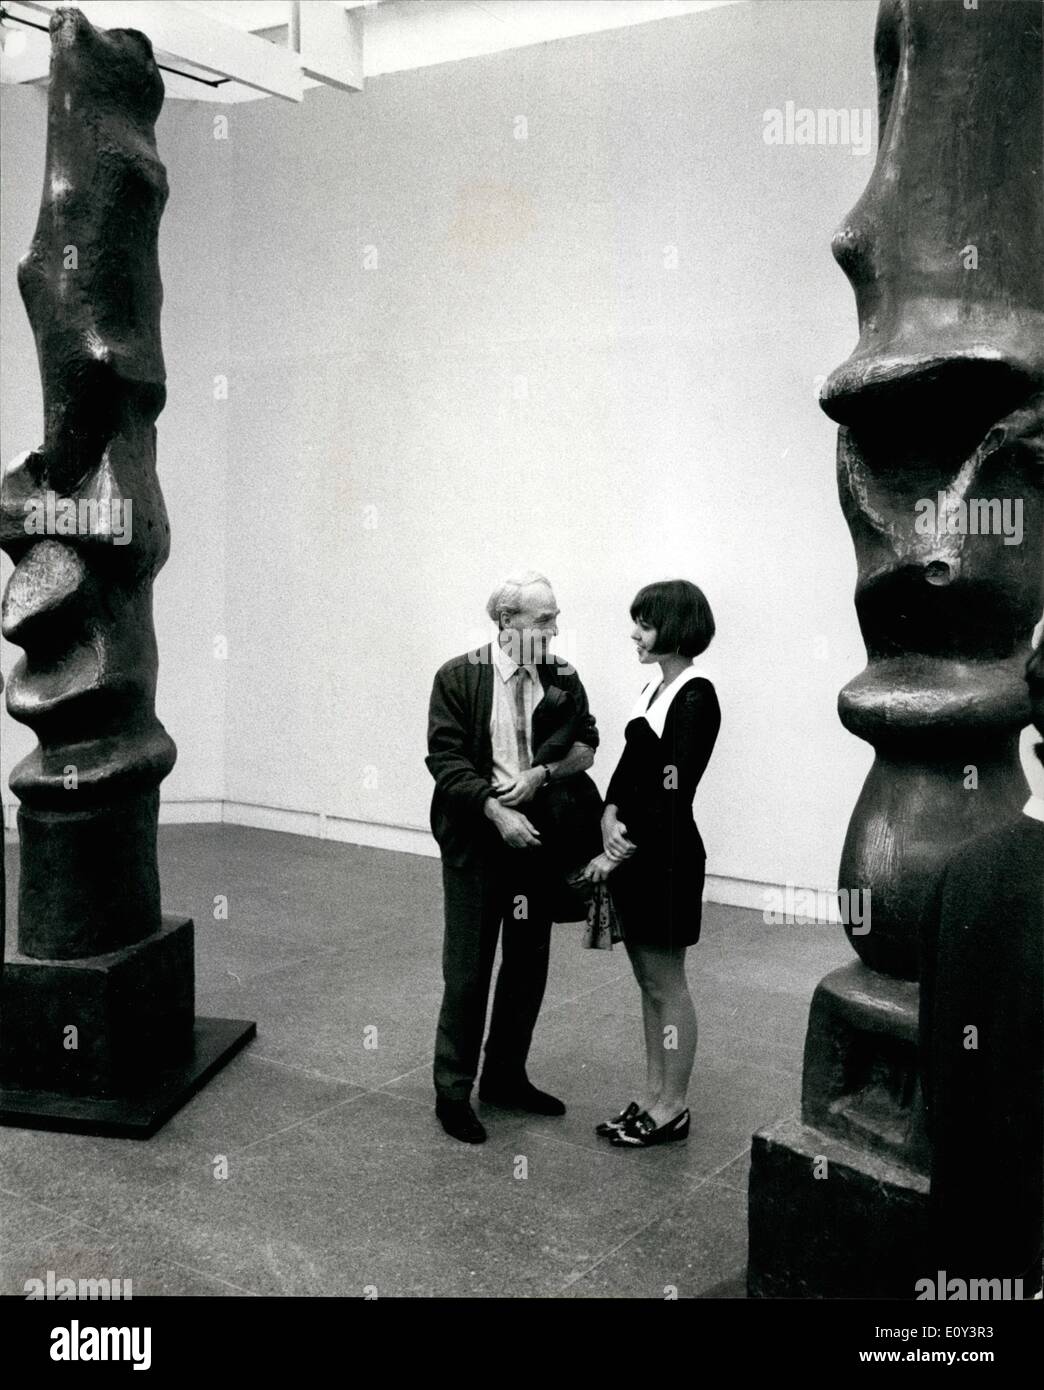 Jul. 07, 1968 - Preview of Henry Moore Exhibition at the Tate Gallery.: A preview was held this morning at the Tate Gallery, London, of the Henry Moore Exhibition which includes, Carvings, Bronzes and Drawings. It will be on show from the 17th July until Sunday 22nd September. Photo shows Henry Moore and his daughter Mary pictured between two of his Upright motives at the Tate Gallery today. Stock Photo